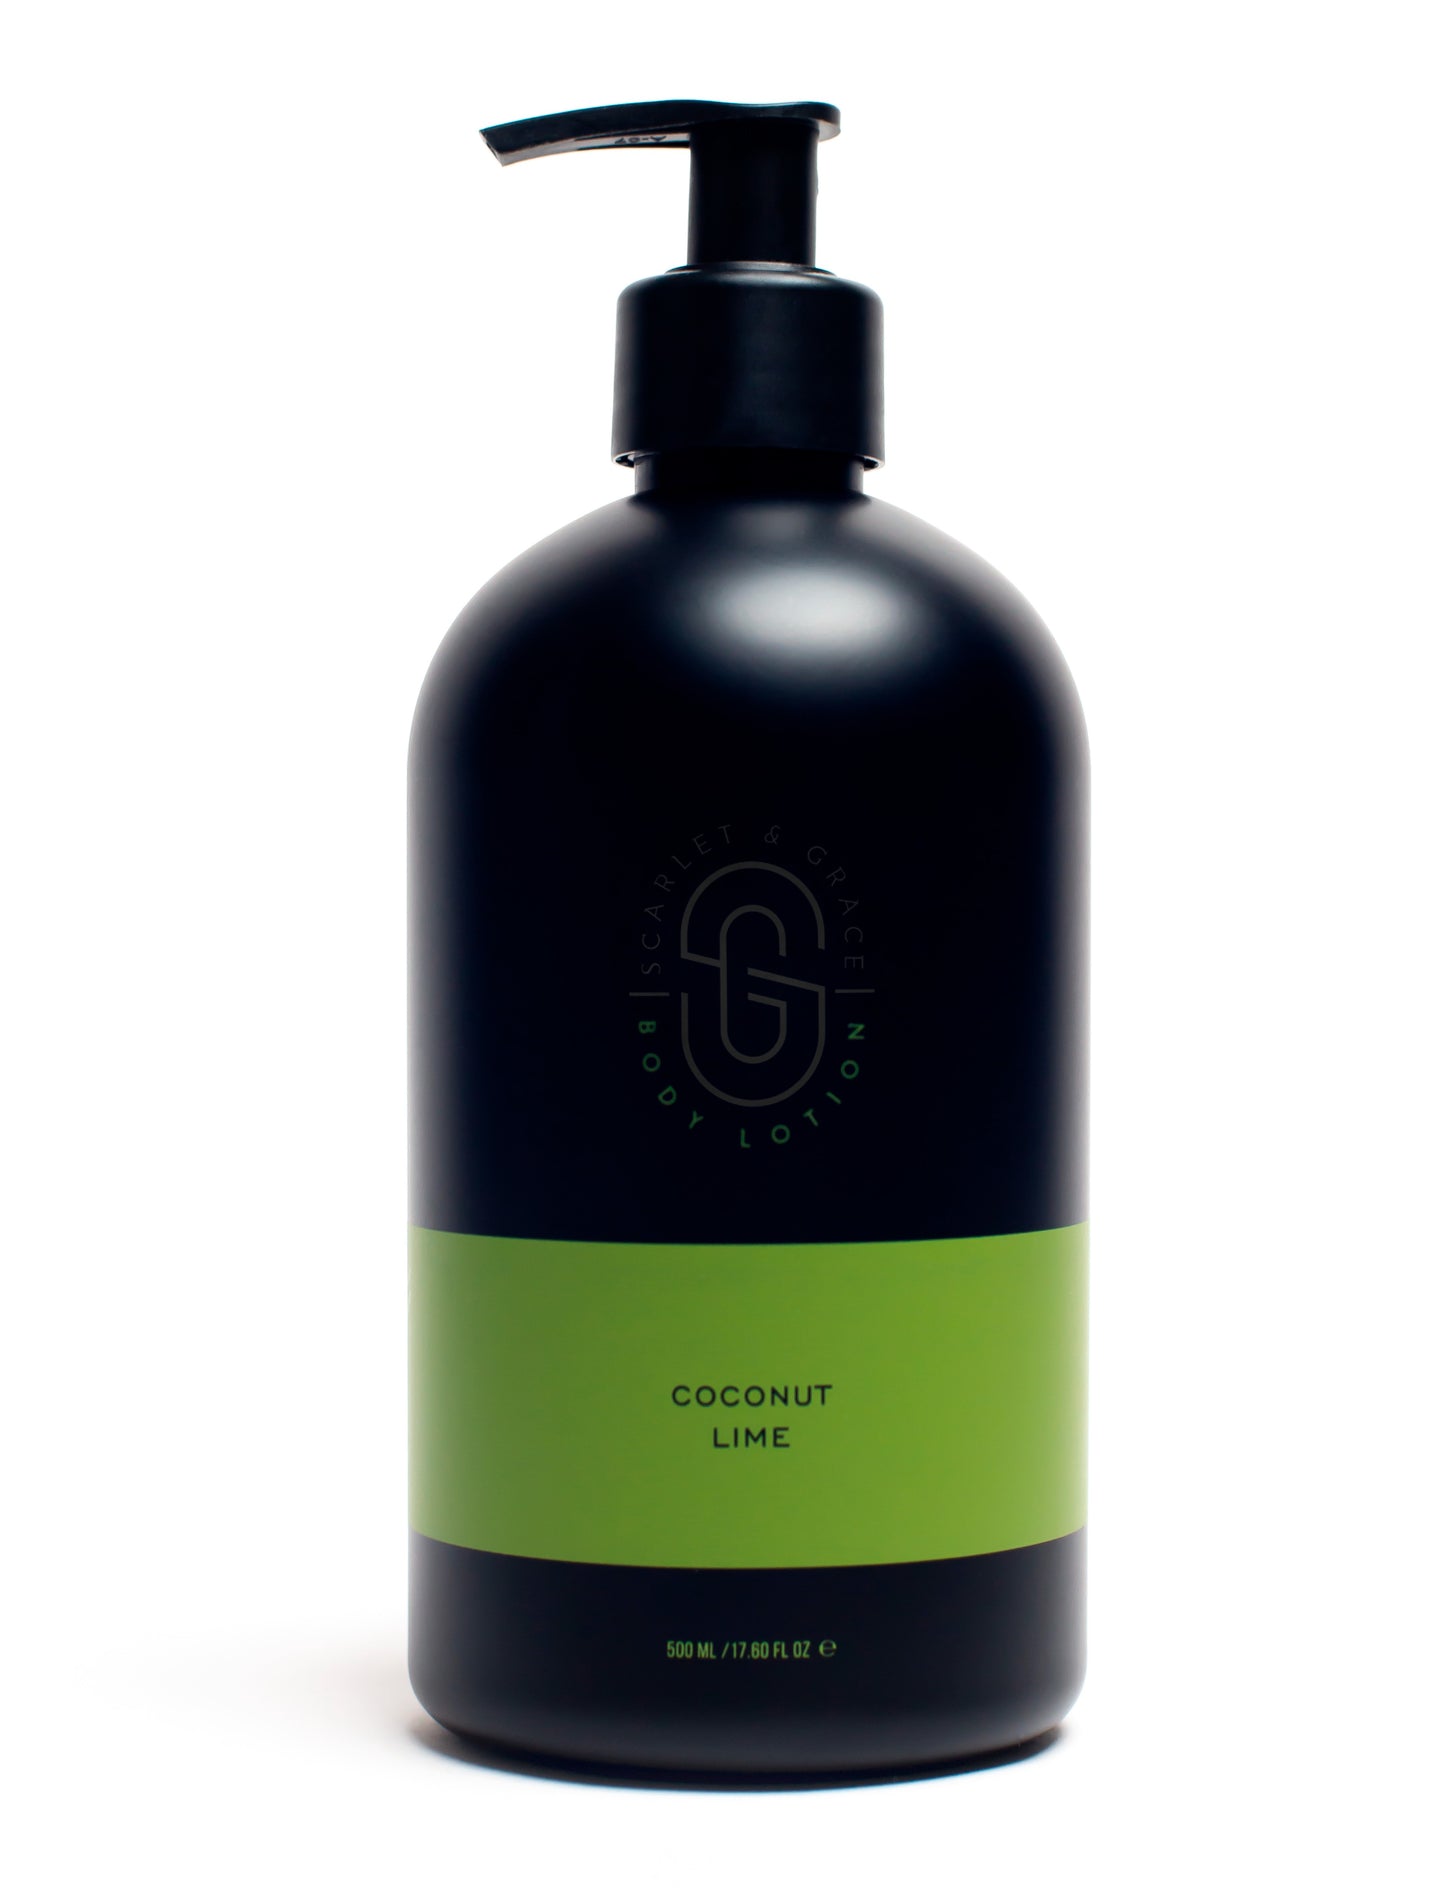 500ML Body Lotion - Coconut Lime